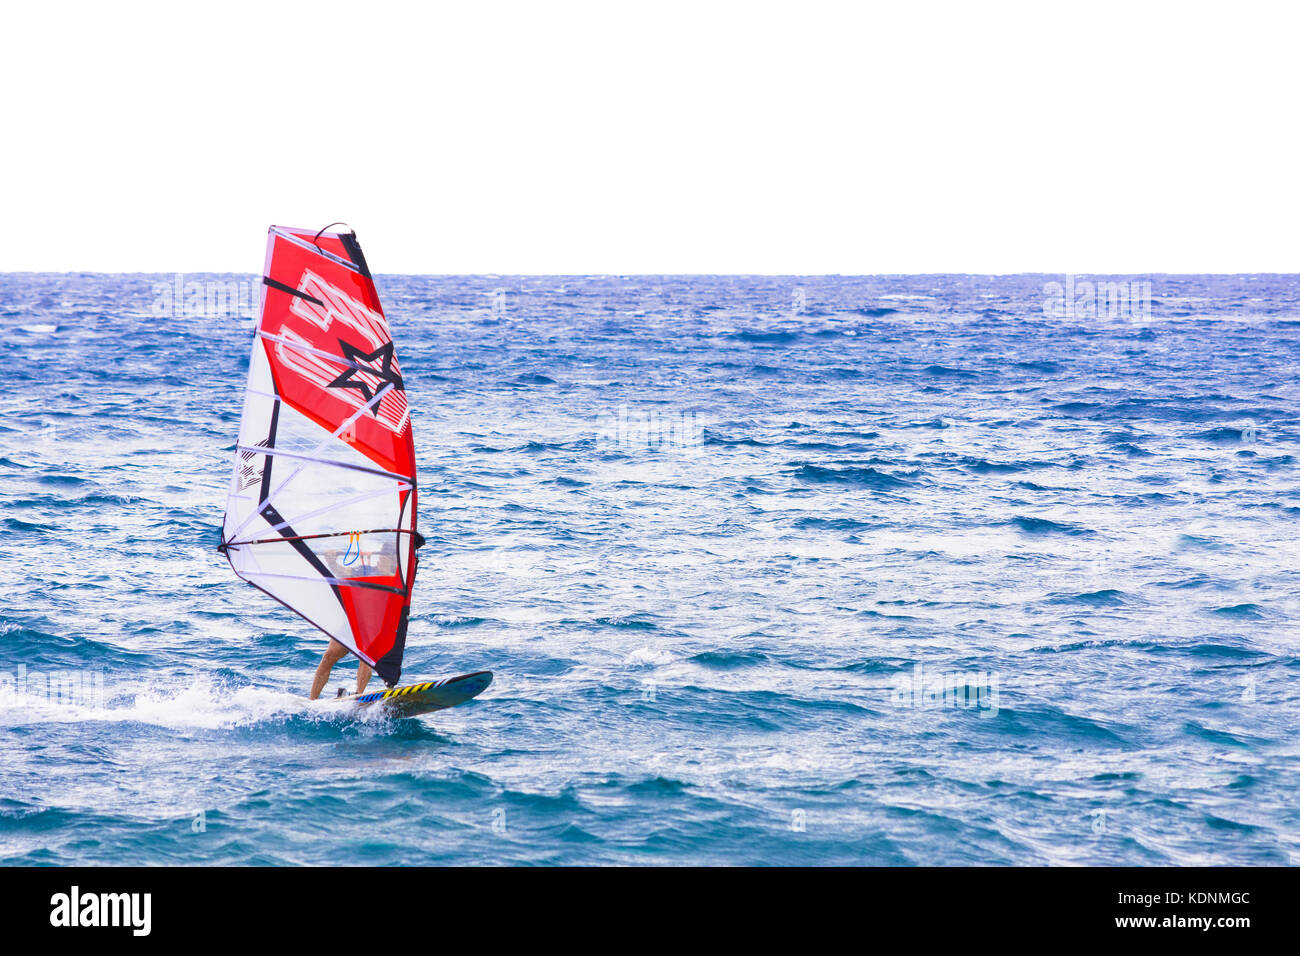 windsurfer that drives its windsurfing speed through the sparkling waves of the Ligurian Sea, in Mediterranean Sea Stock Photo